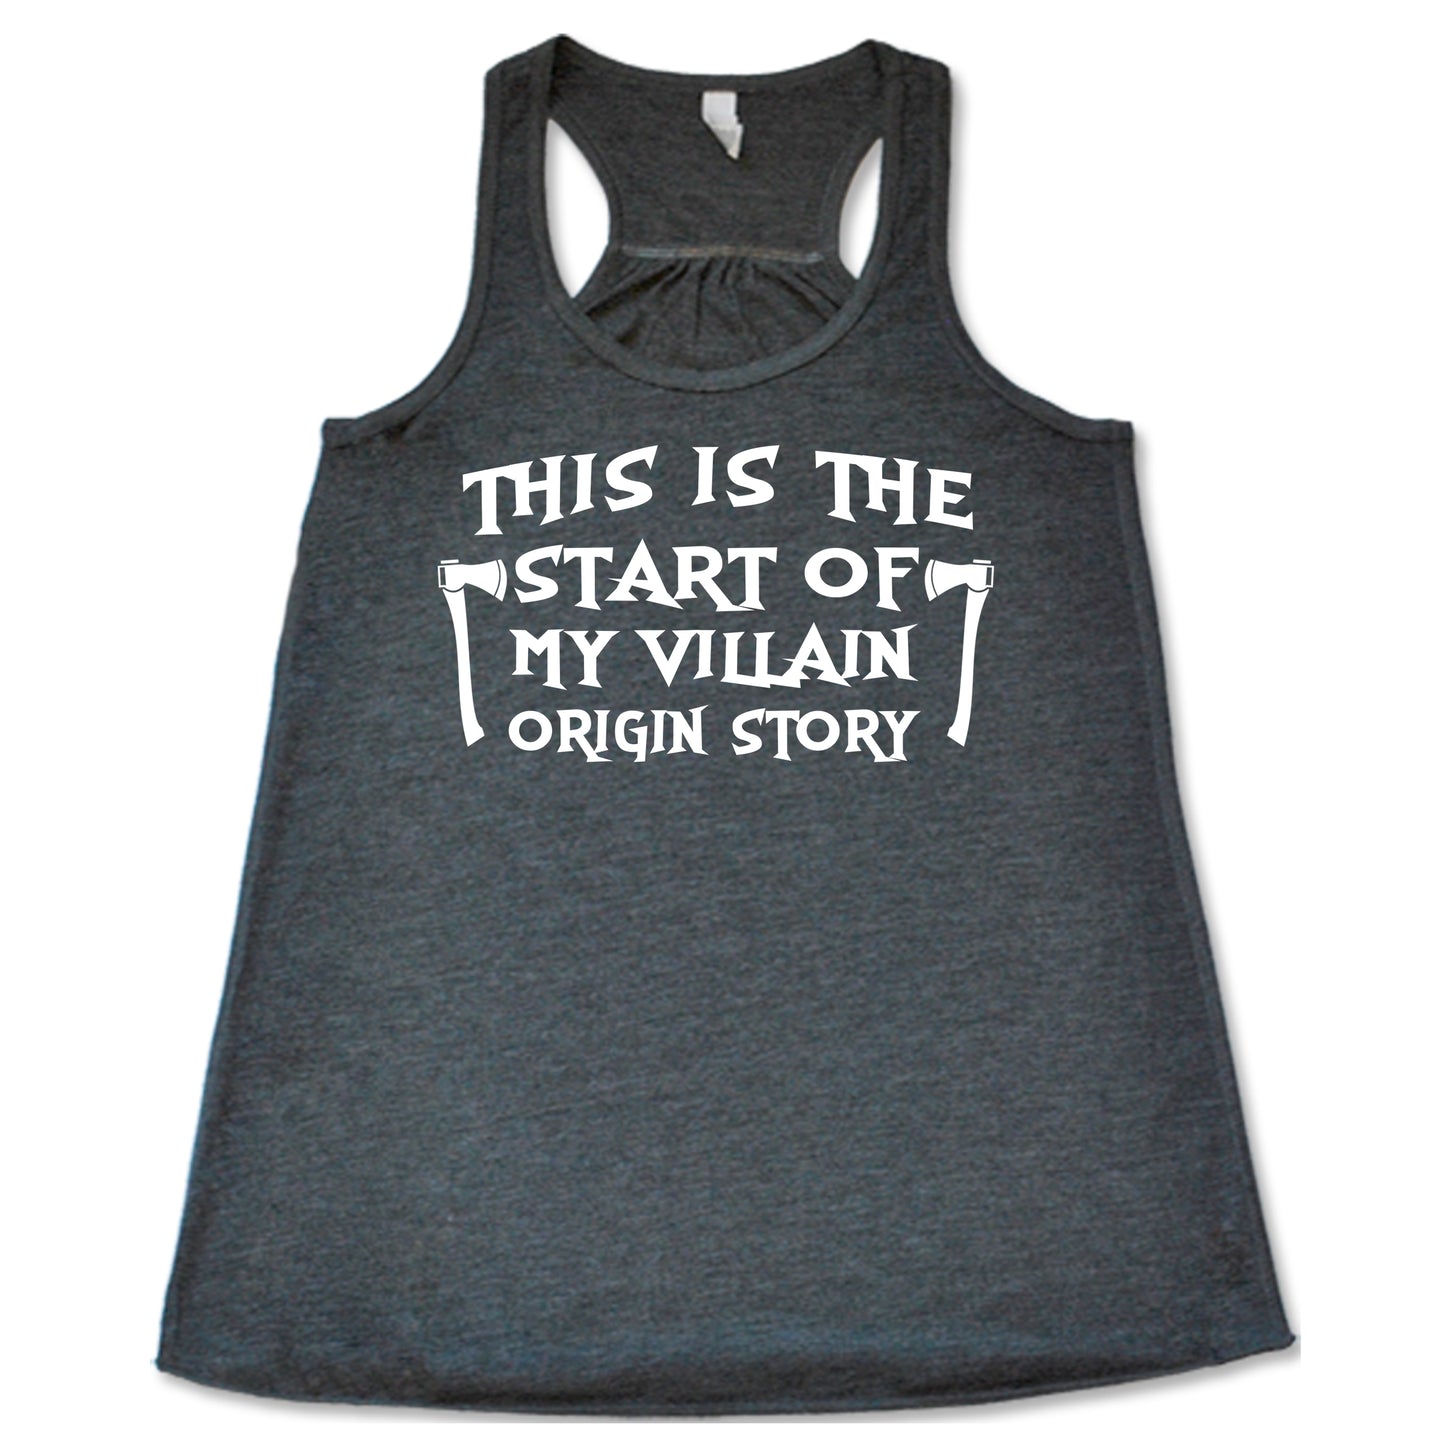 This Is The Start Of My Villain Origin Story grey tank top